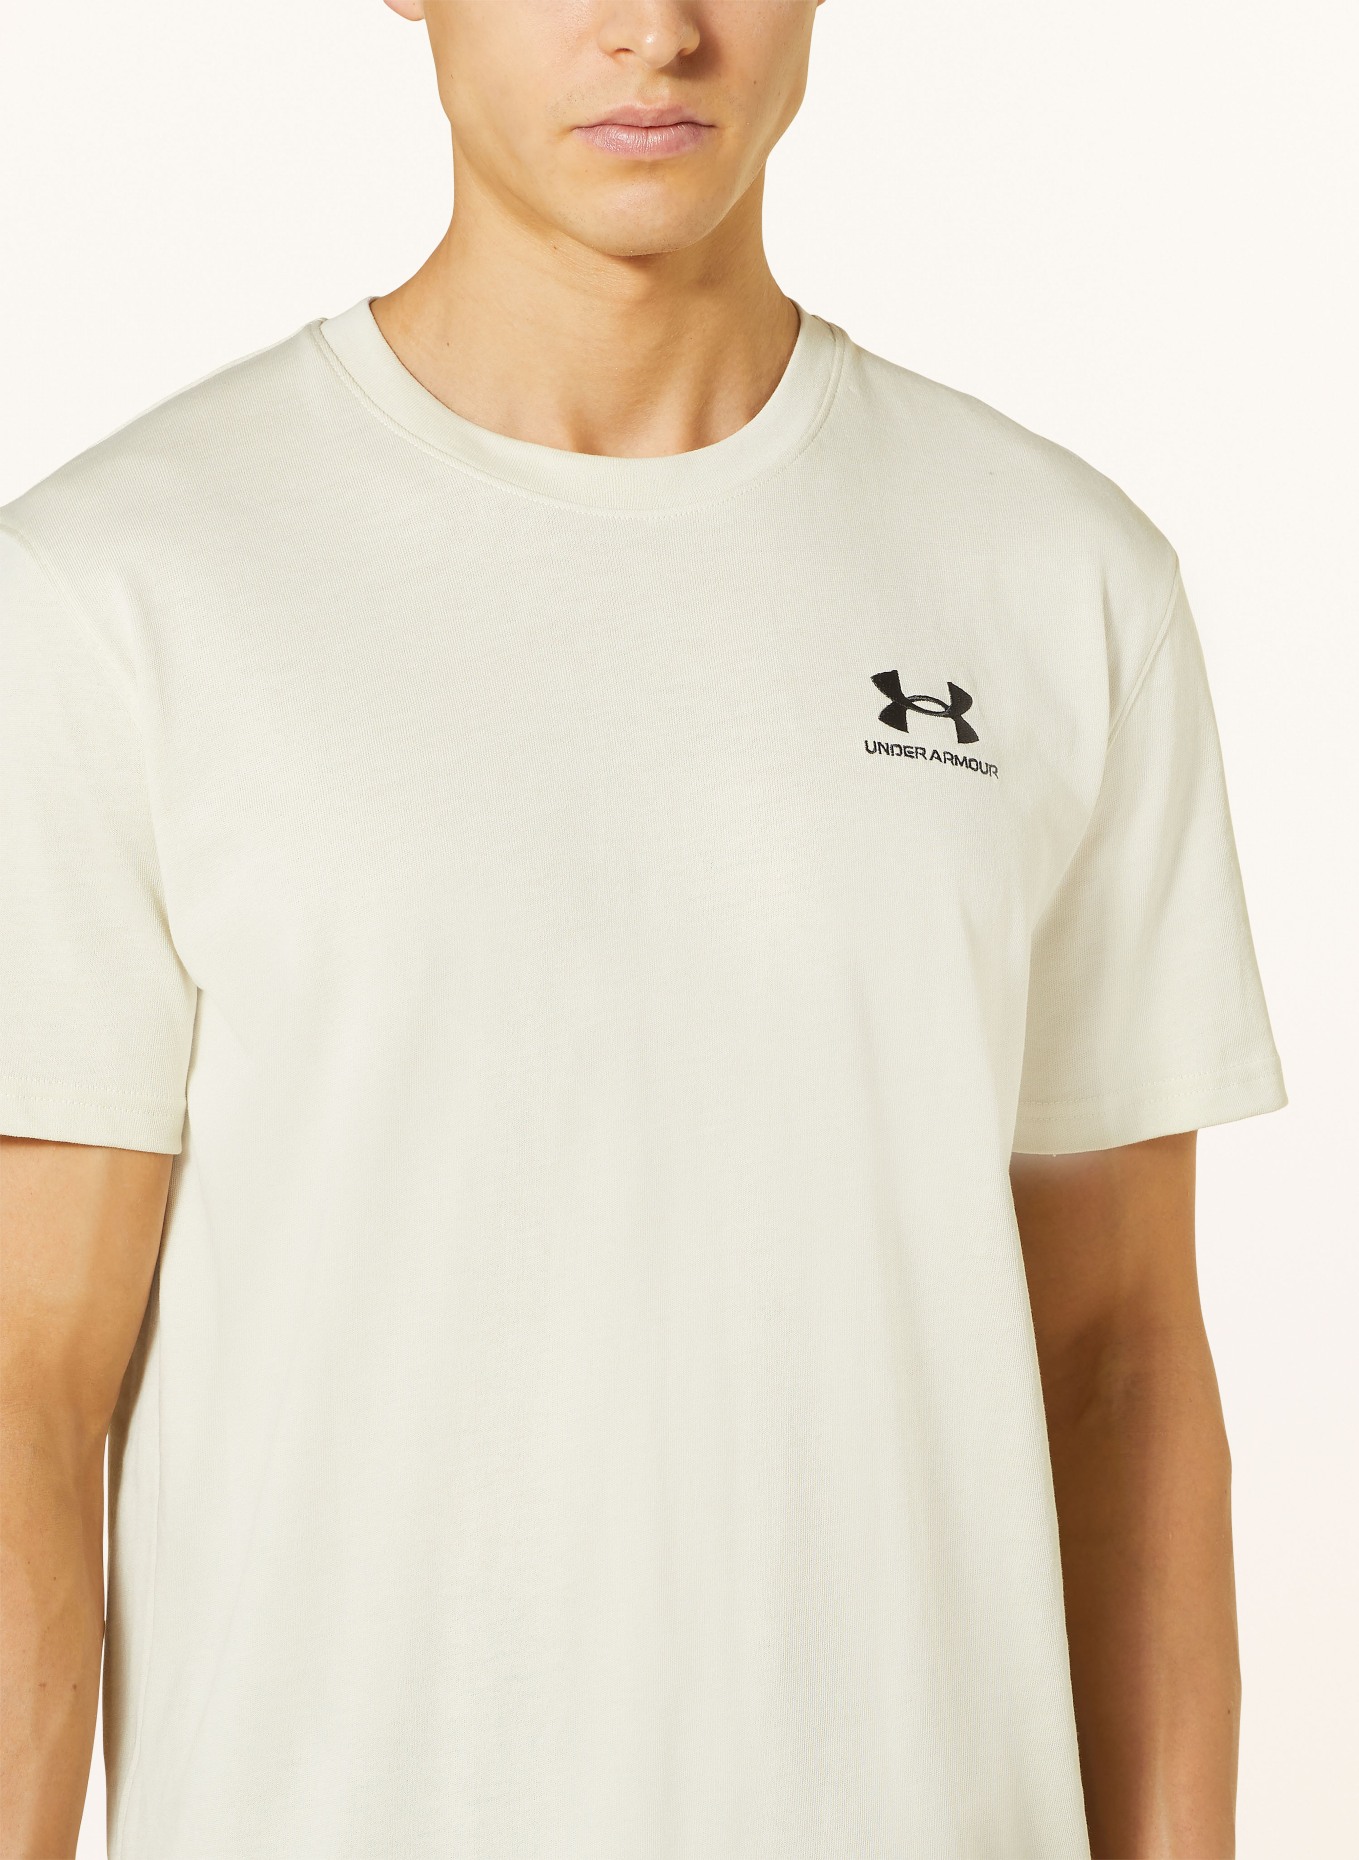 UNDER ARMOUR T-shirt HEAVYWEGHT, Color: LIGHT GREEN (Image 4)